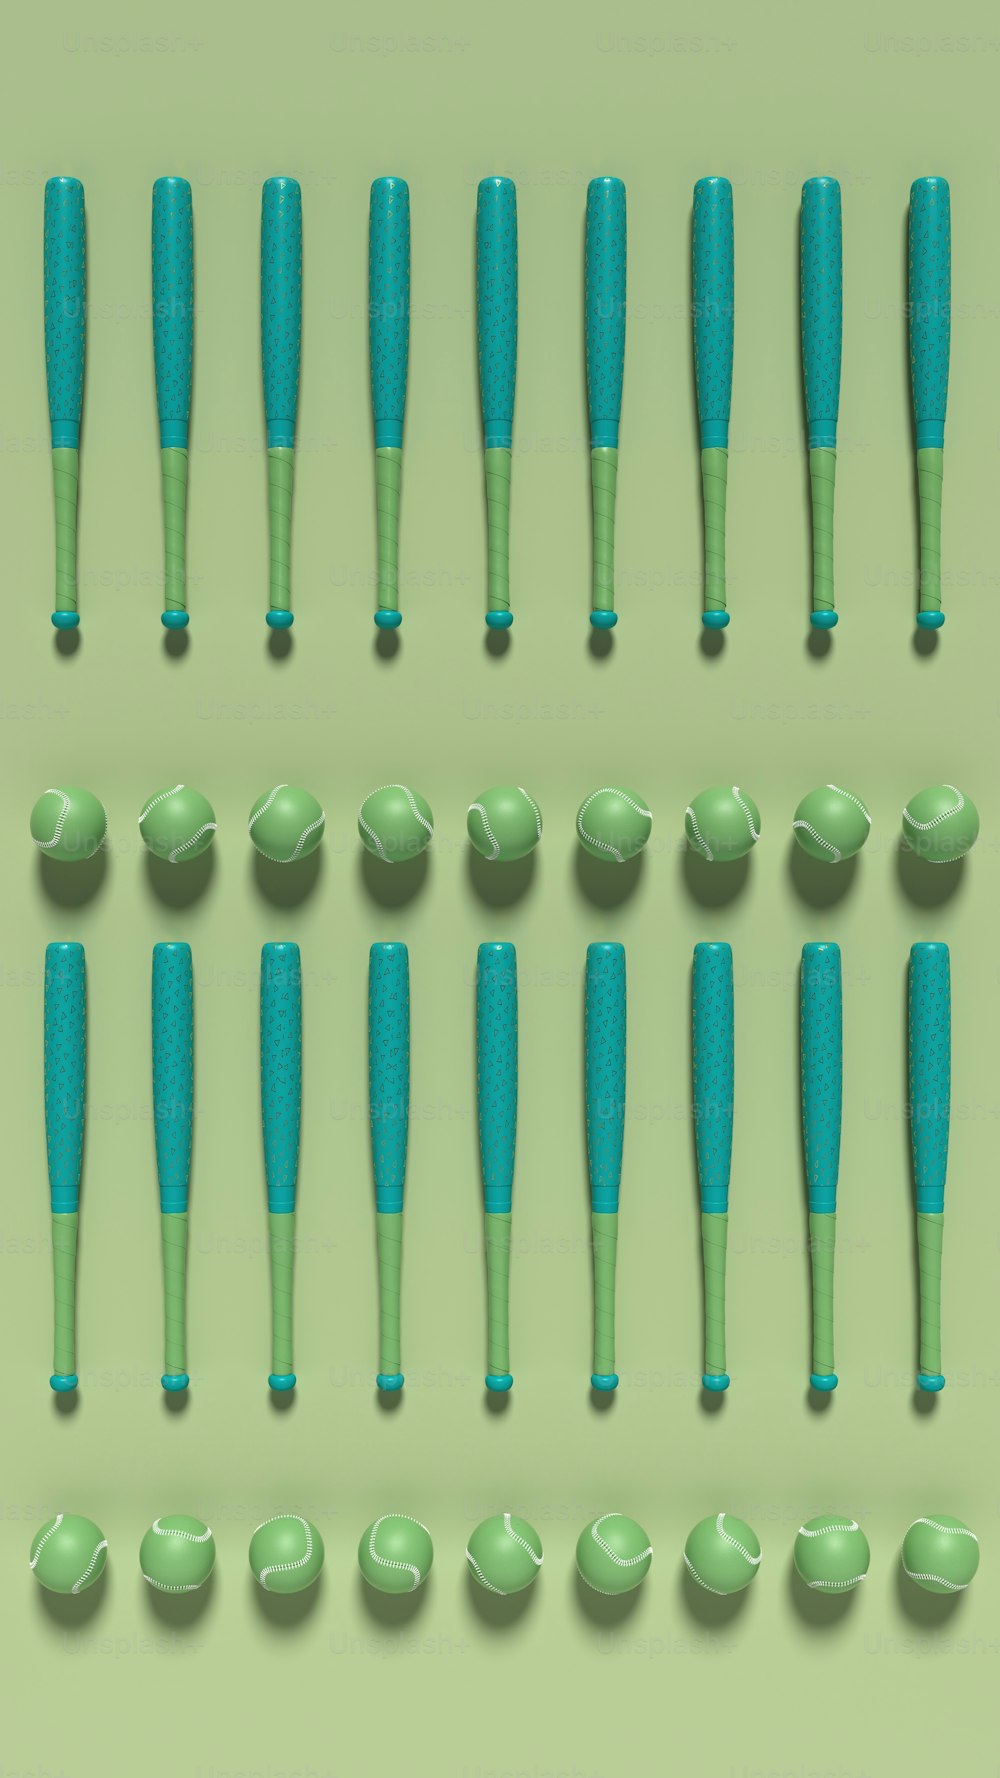 a group of blue and green toothbrushes on a green background